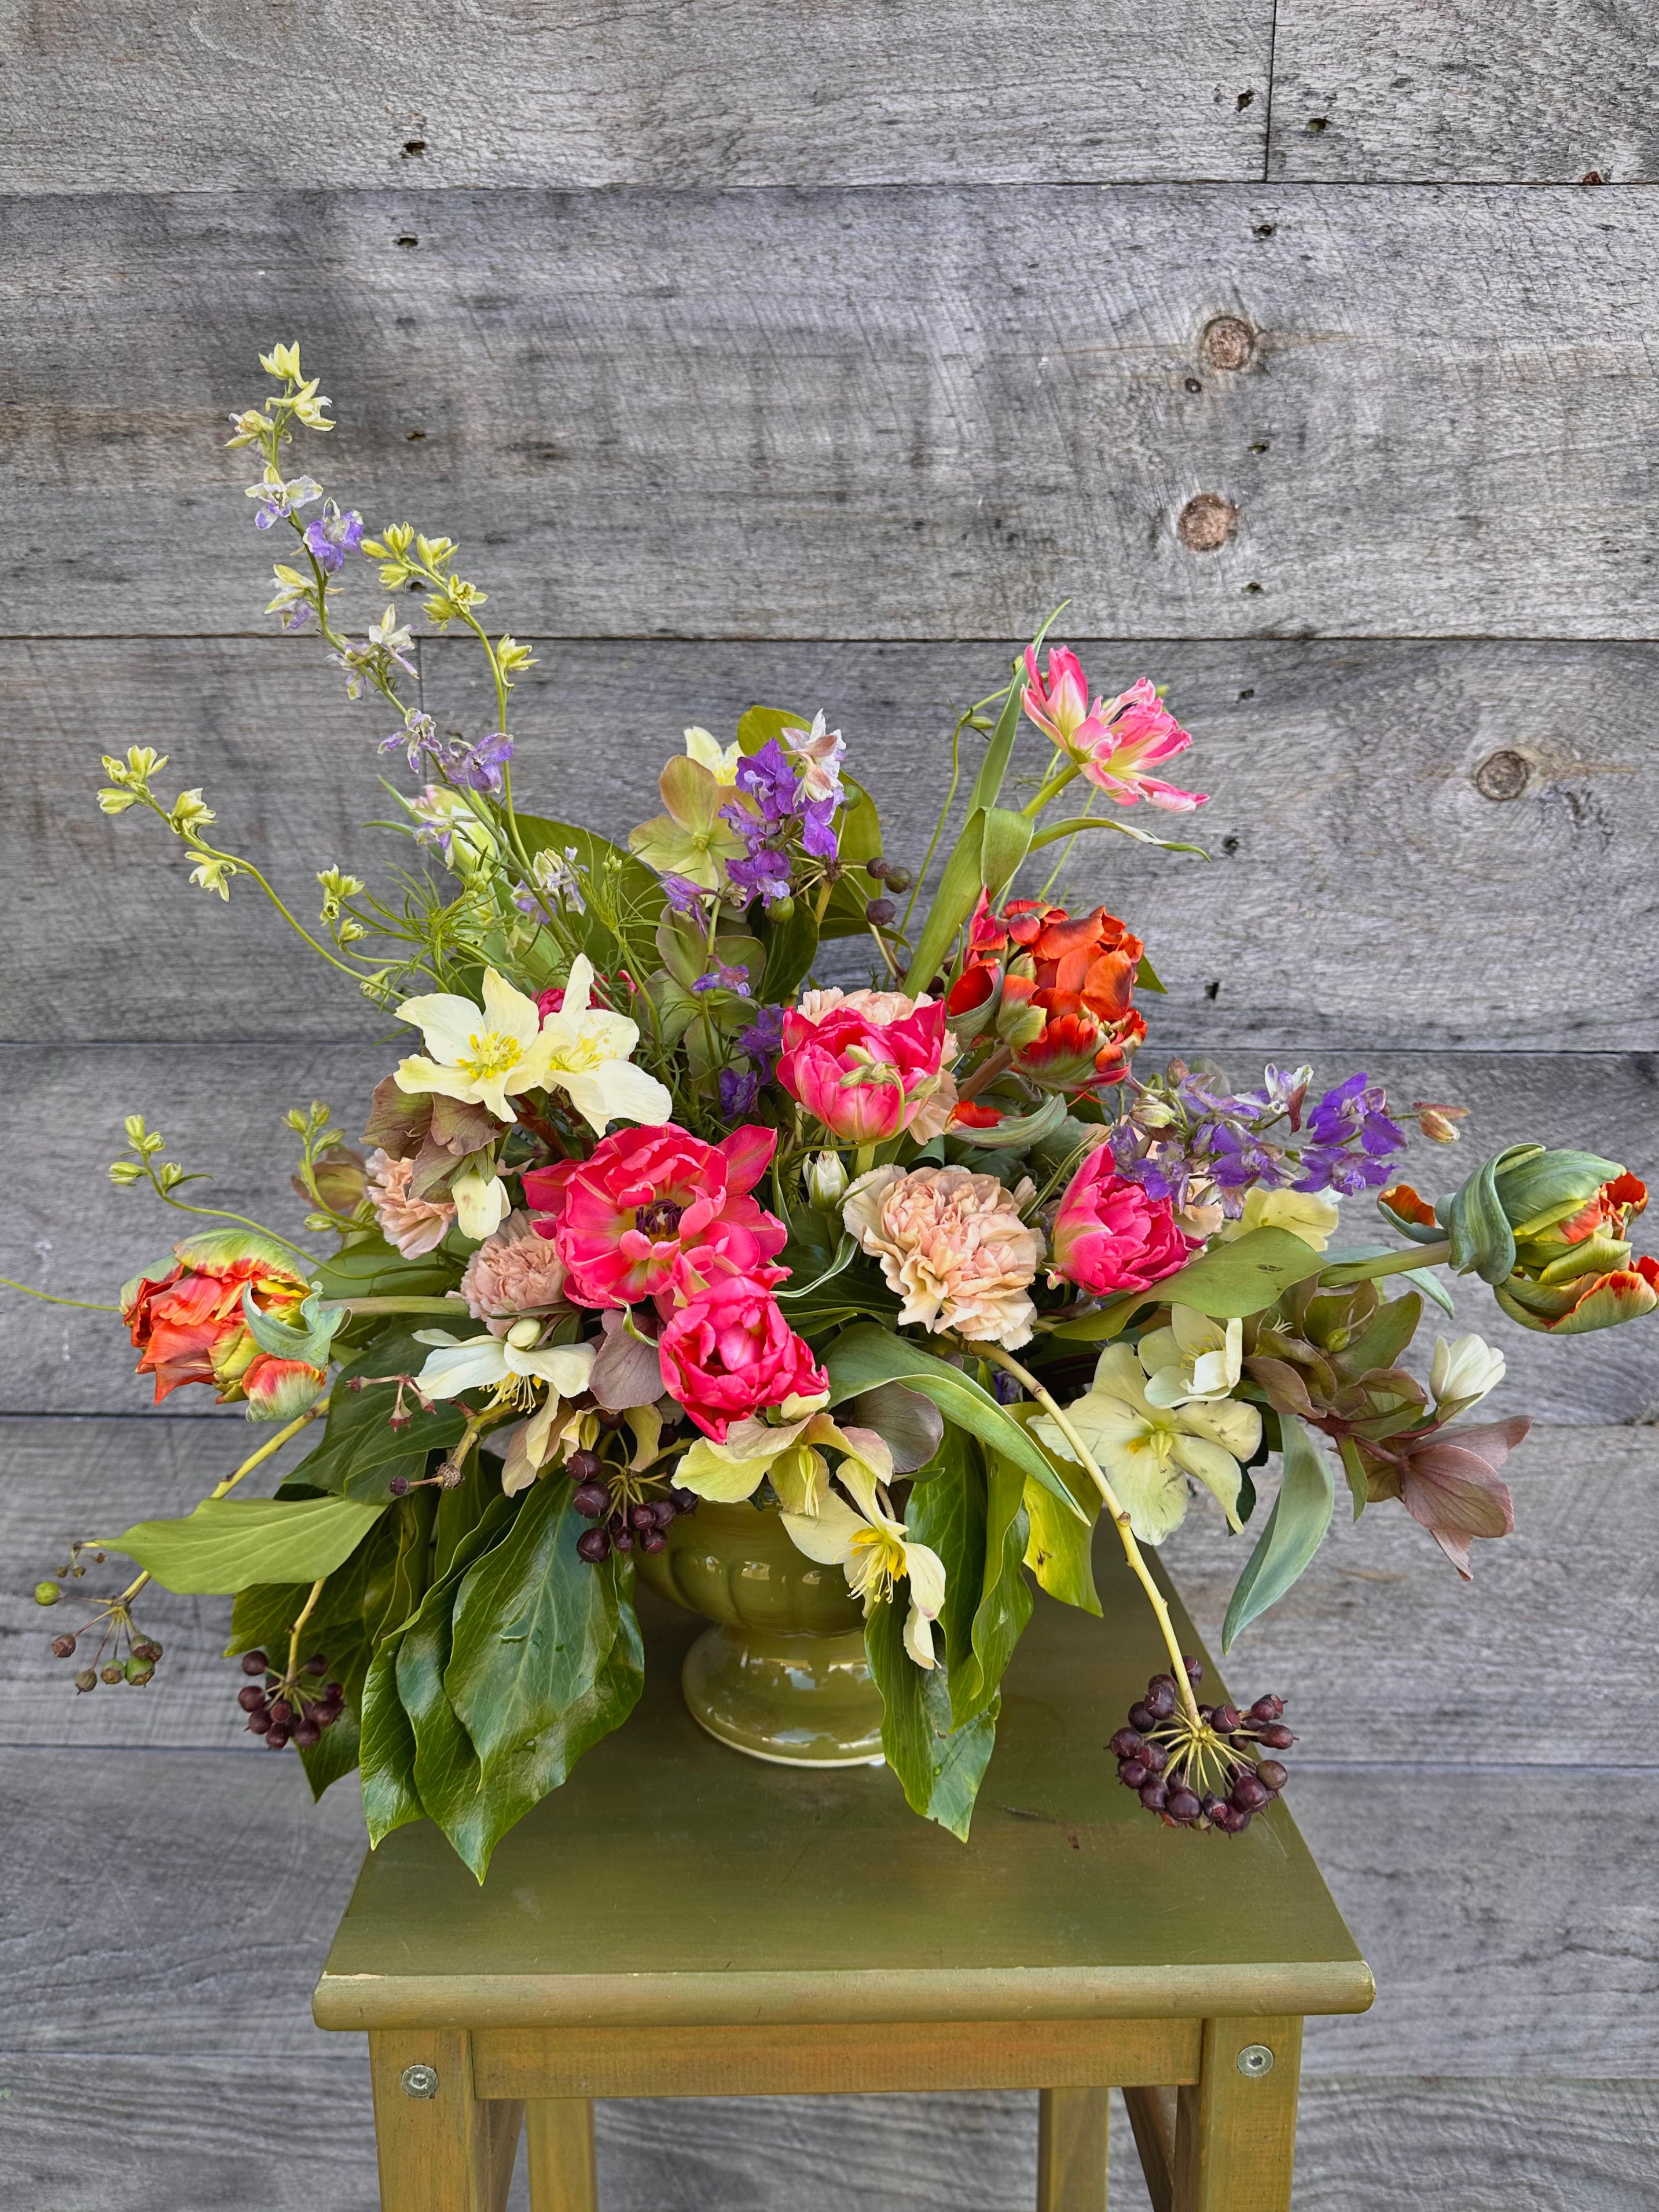 Large, whimsical compote arrangement with spring flowers